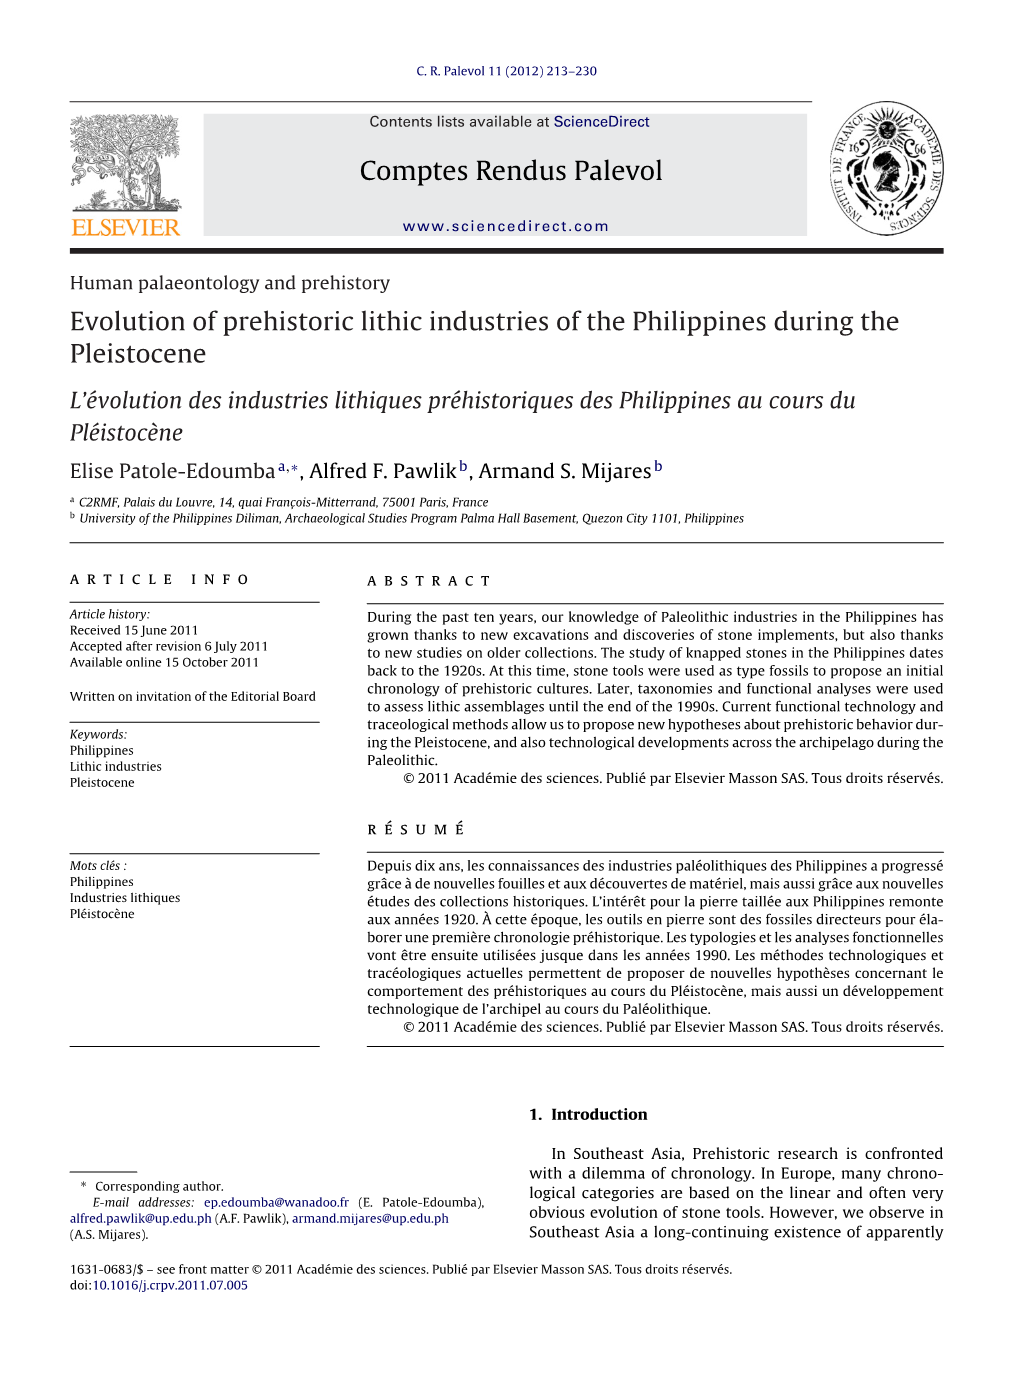 Evolution of Prehistoric Lithic Industries of the Philippines During The